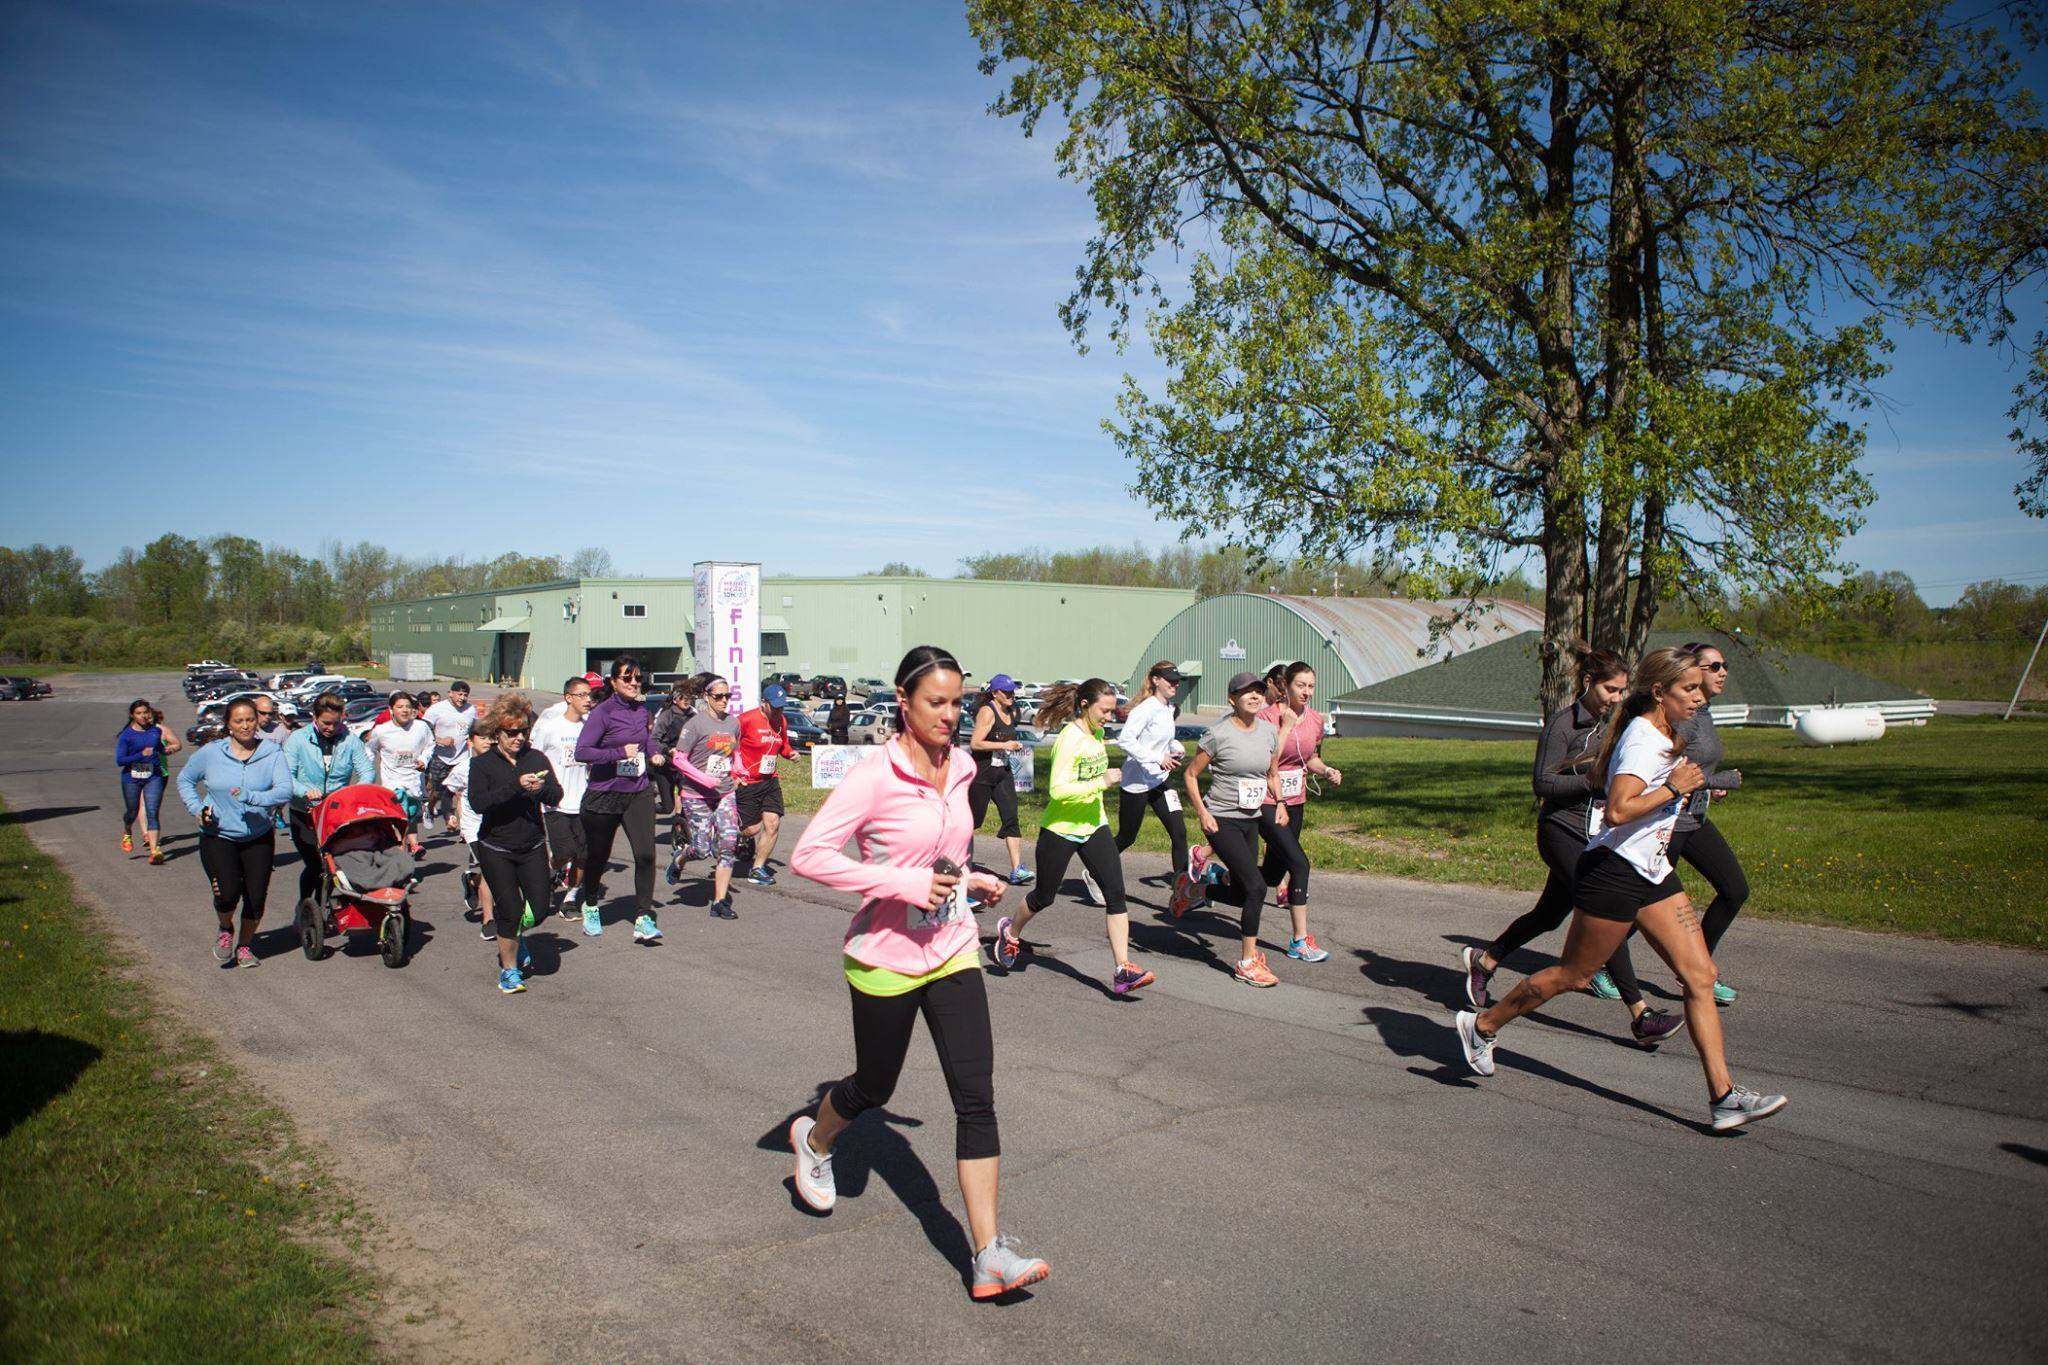 Get your heart rate up at the annual 10km Walk & Run, which benefits the Akwesasne Boys & Girls Club.